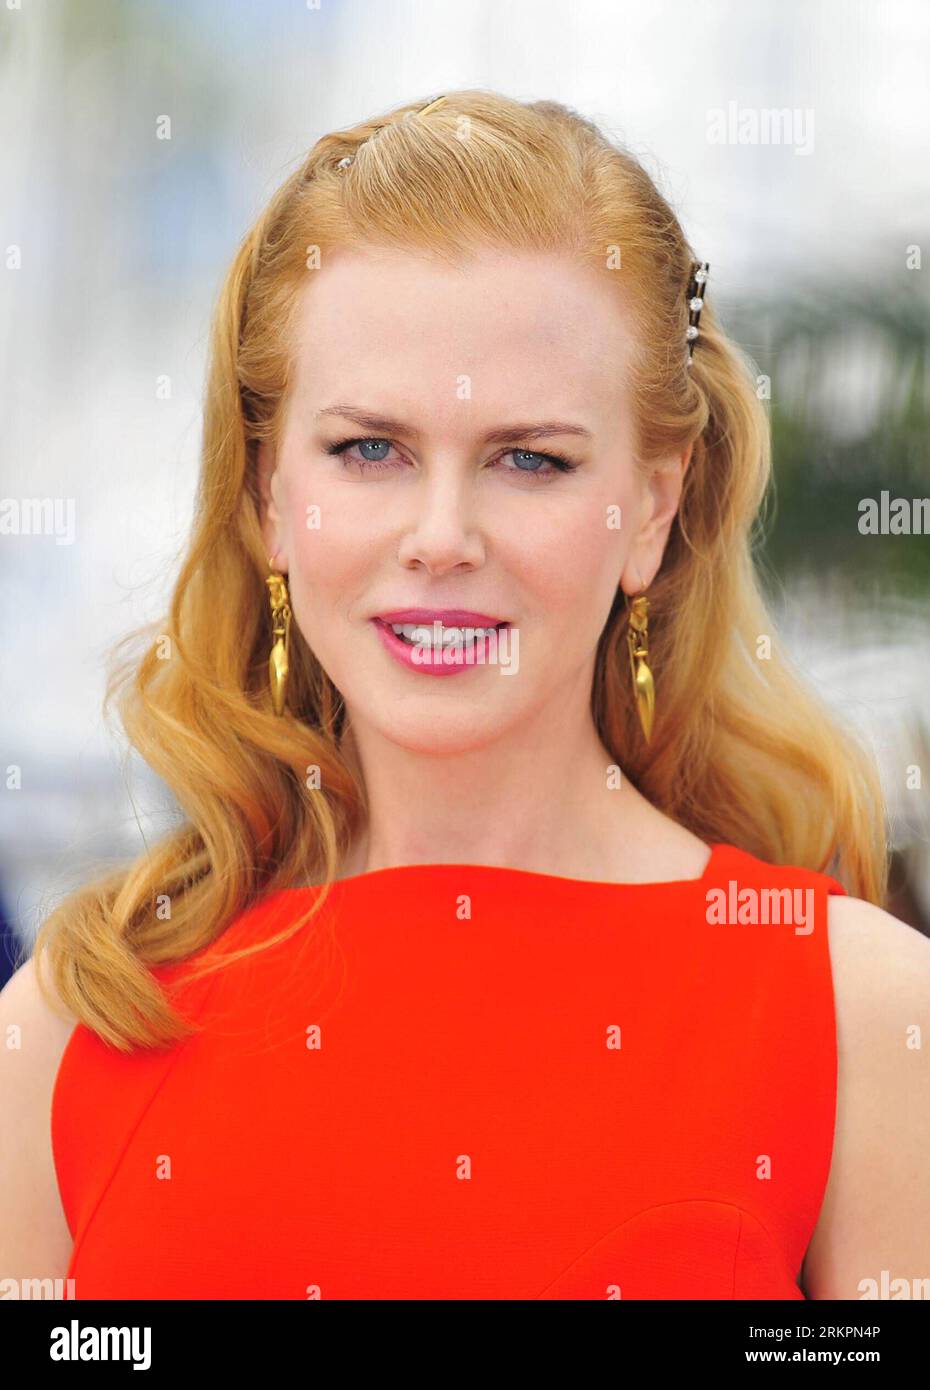 Bildnummer: 58030783  Datum: 24.05.2012  Copyright: imago/Xinhua (120524) -- CANNES, May 24, 2012 (Xinhua) --Actress Nicole Kidman poses for photos during a photo call for the film The Paperboy at the 65th Cannes Film Festival, in Cannes, southern France, May 24, 2012.(Xinhua/Ye Pingfan)(srb) FRANCE-CANNES-FILM FESTIVAL-PHOTO CALL-THE PAPERBOY PUBLICATIONxNOTxINxCHN Kultur Entertainment People Film 65. Internationale Filmfestspiele Cannes Porträt x0x xkg 2012 hoch      58030783 Date 24 05 2012 Copyright Imago XINHUA  Cannes May 24 2012 XINHUA actress Nicole Kidman Poses for Photos during a Pho Stock Photo